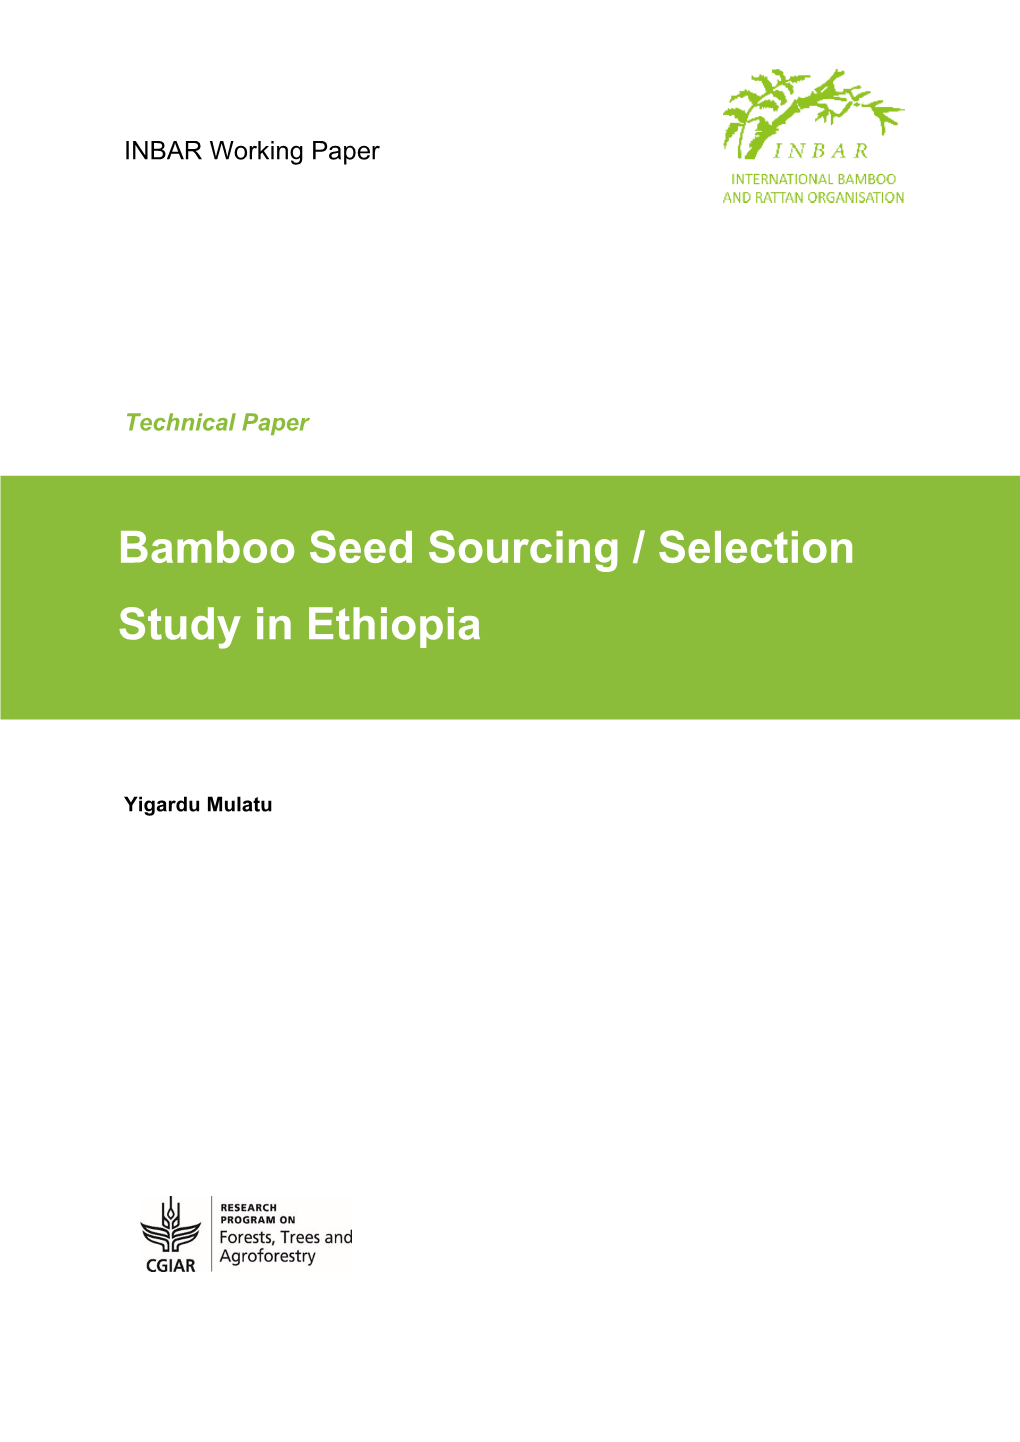 Bamboo Seed Sourcing / Selection Study in Ethiopia